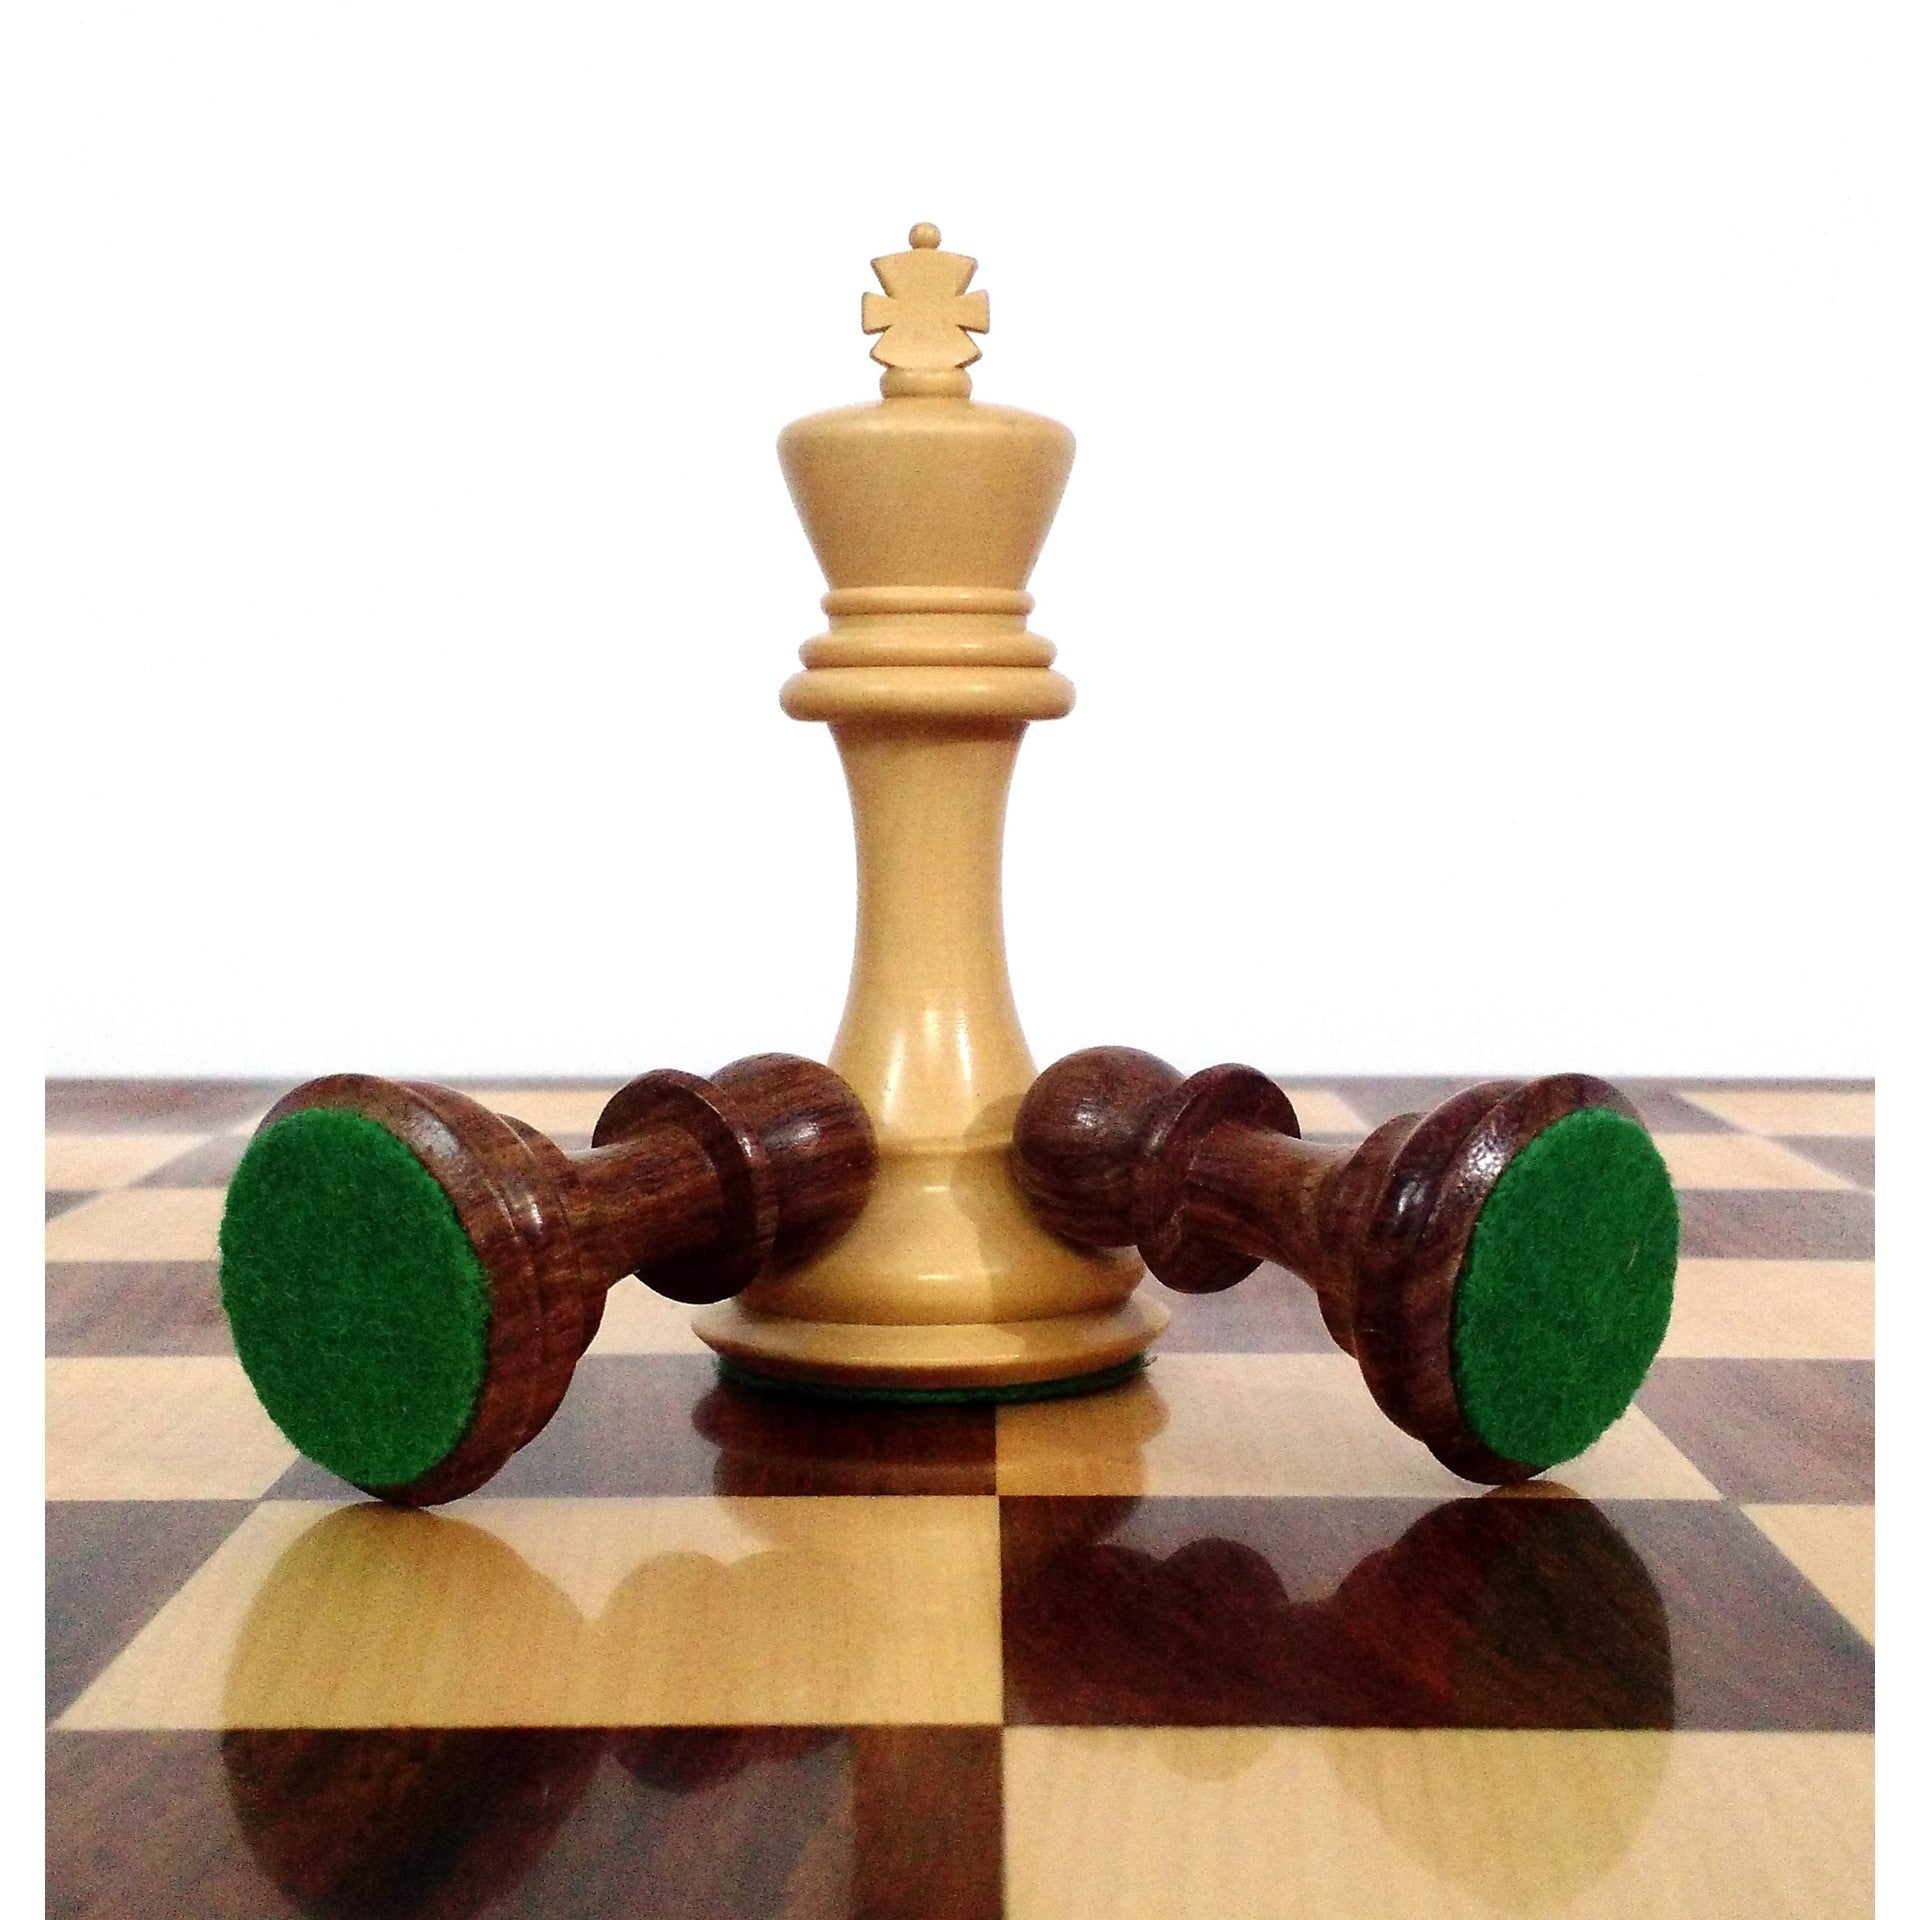 Slightly Imperfect 4.1" Pro Staunton Weighted Wooden Chess Pieces Only Set - Sheesham wood - 4 queens